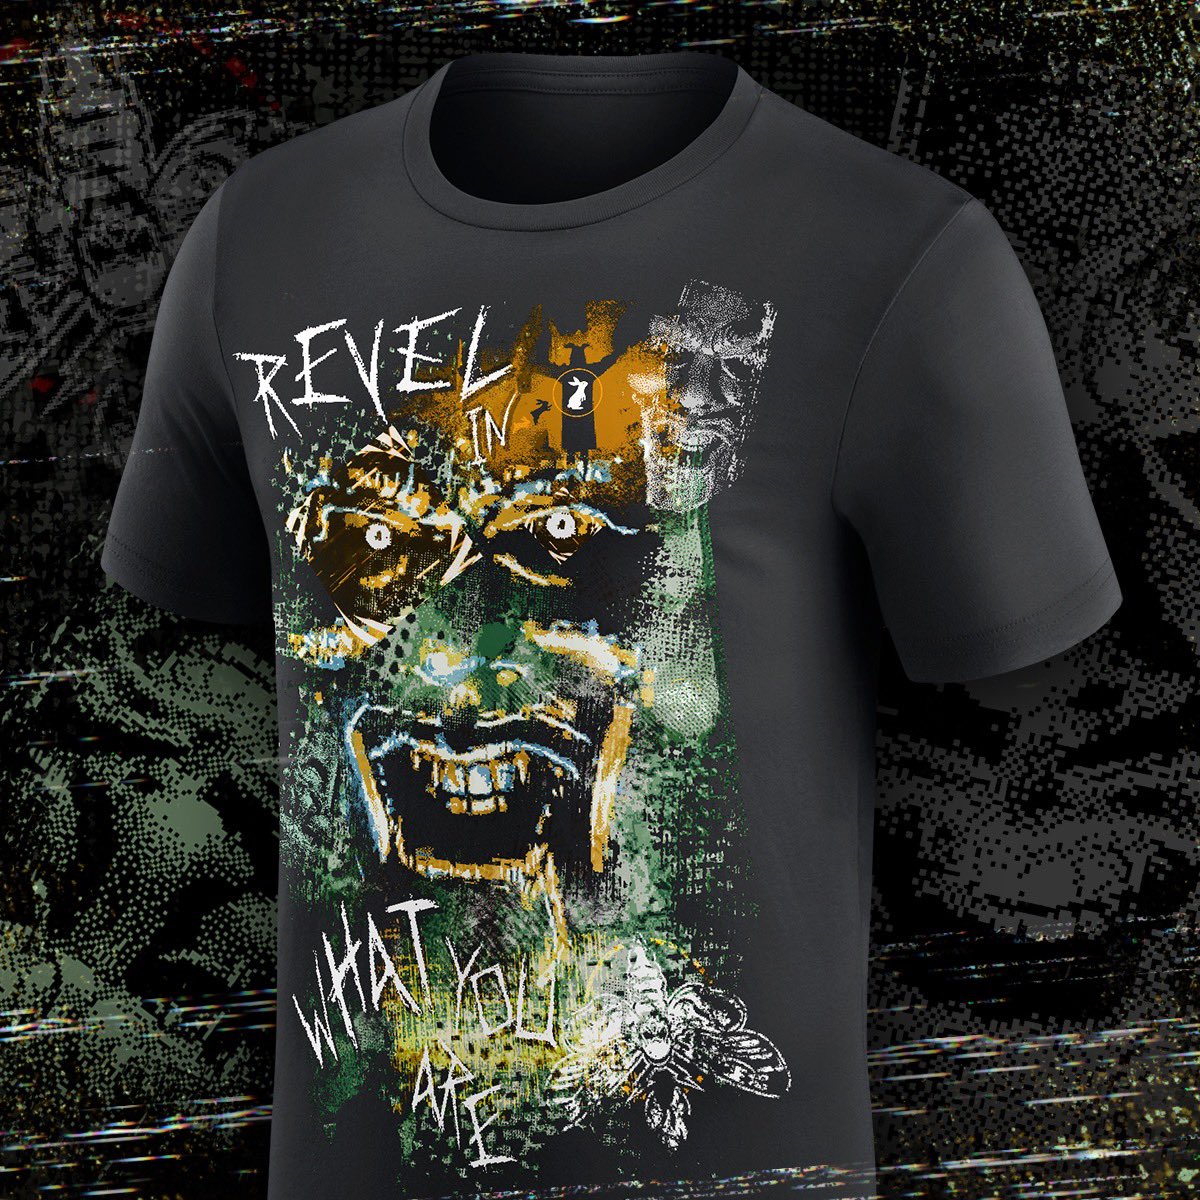 WWEShop.com on X: Revel In What Your Are! Get this NEW T-shirt